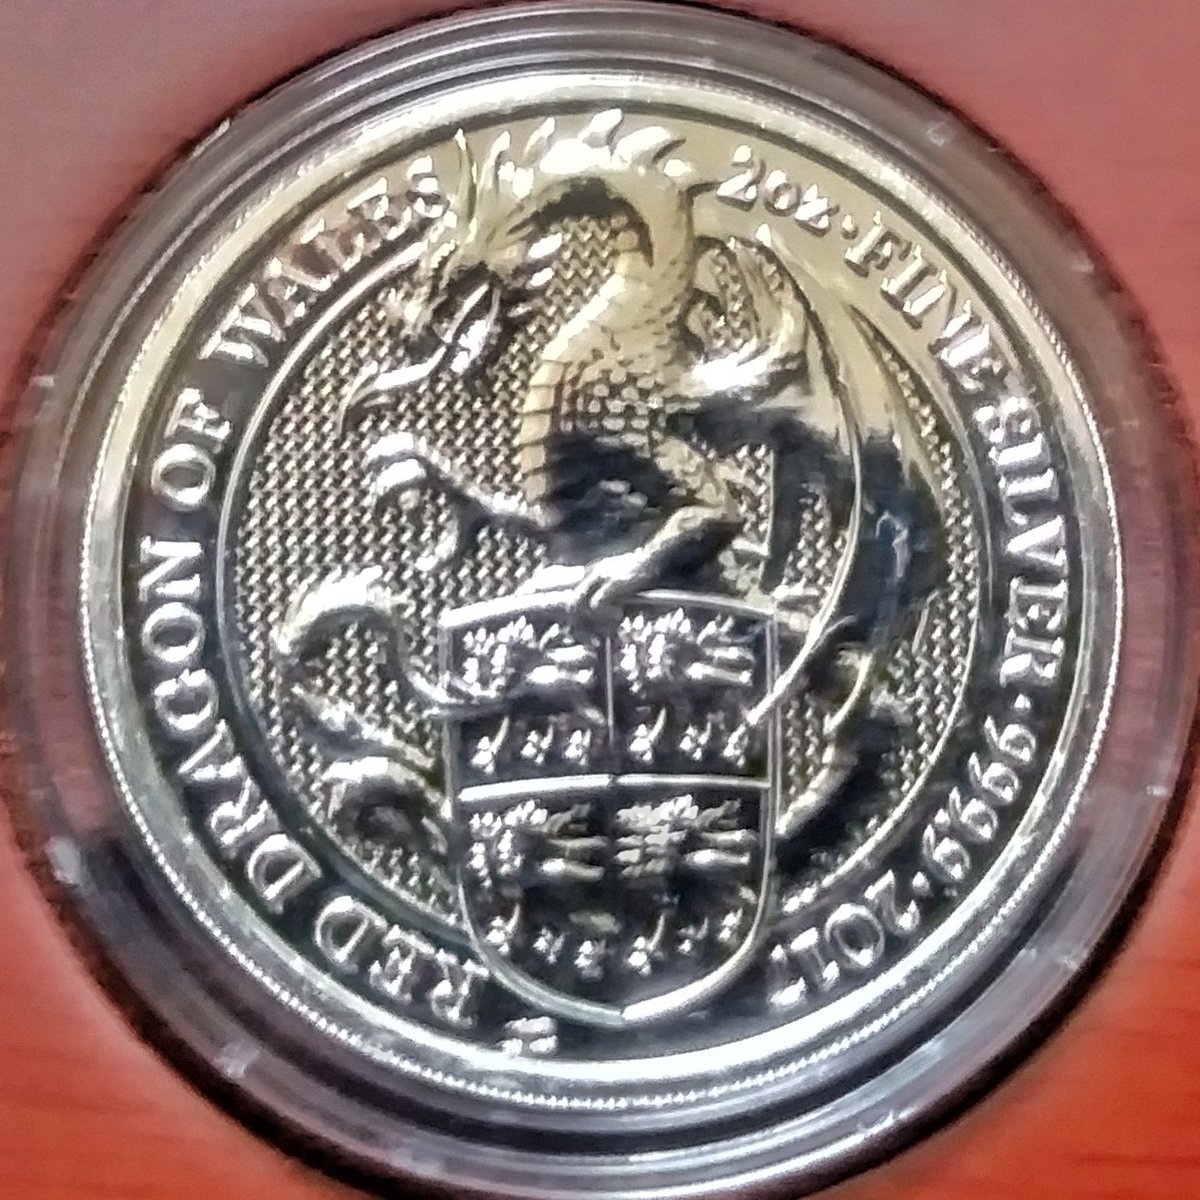 I feel inspired to show my favorite silver coin here, It's the Red Dragon of Wales! #furrynumismatics